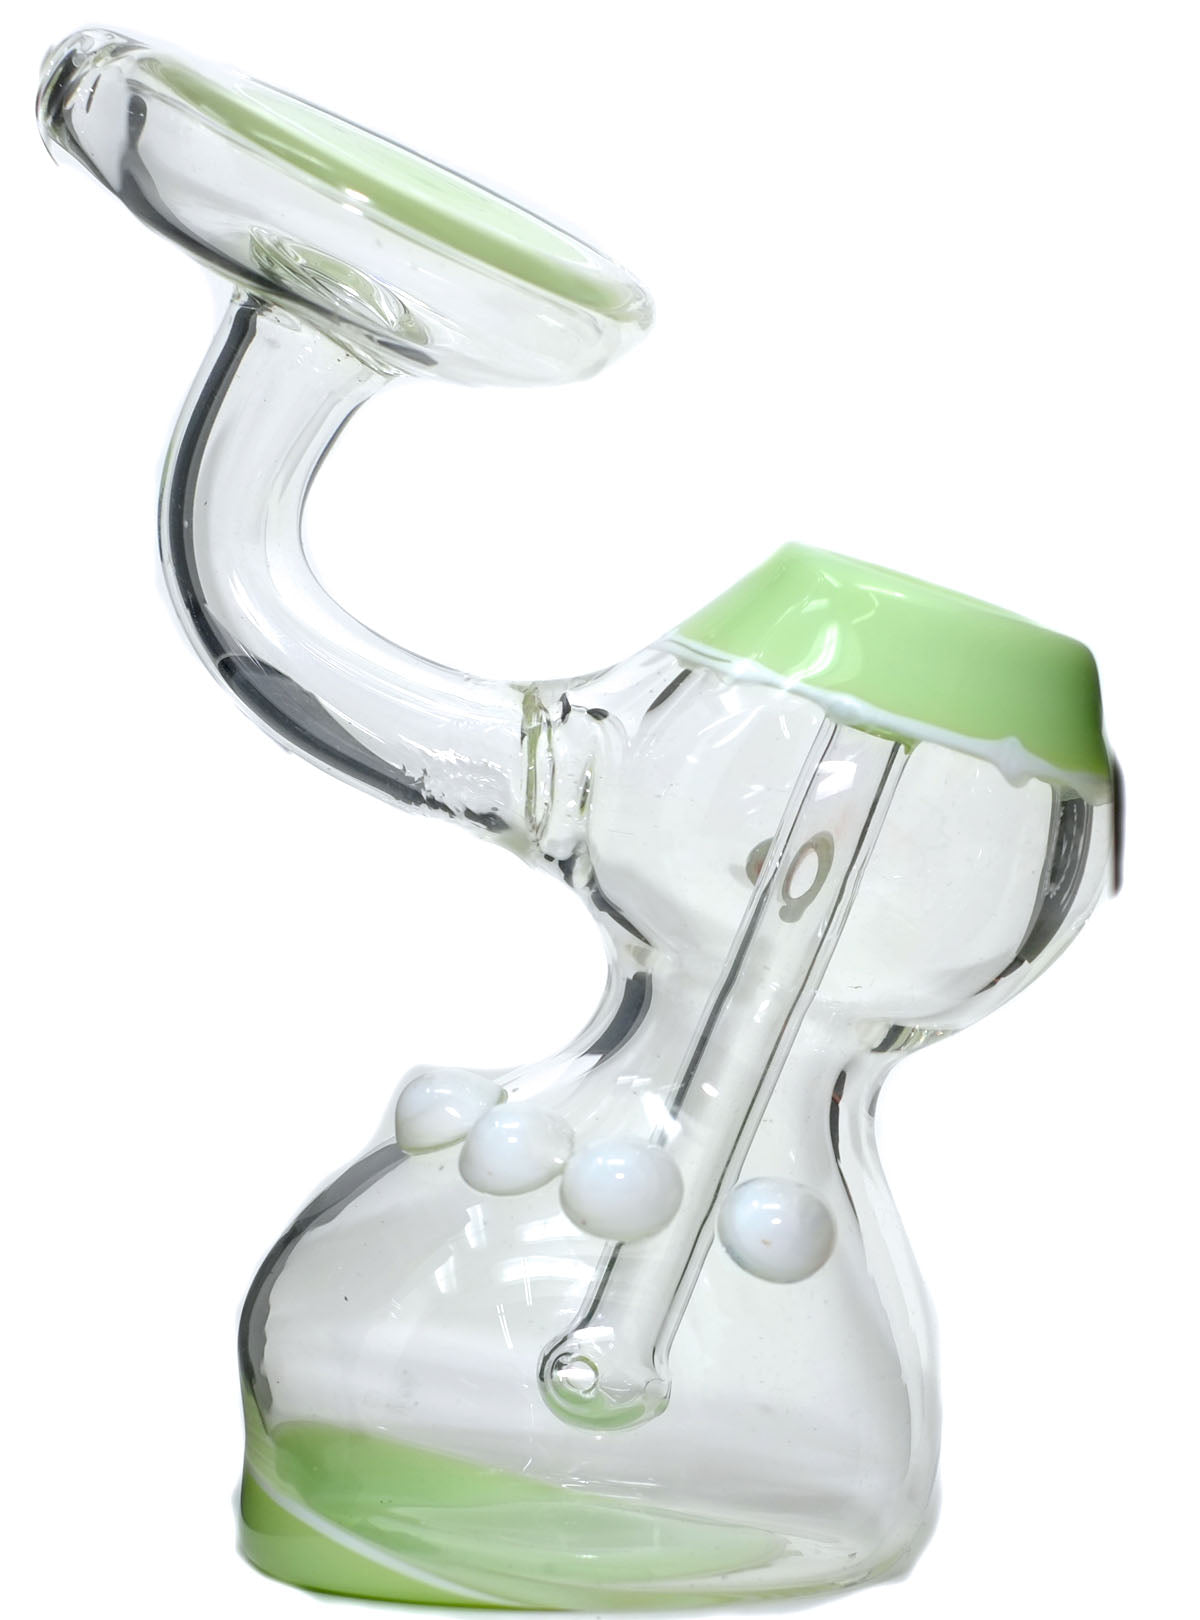 5" flying disk Bubbler Water Pipe